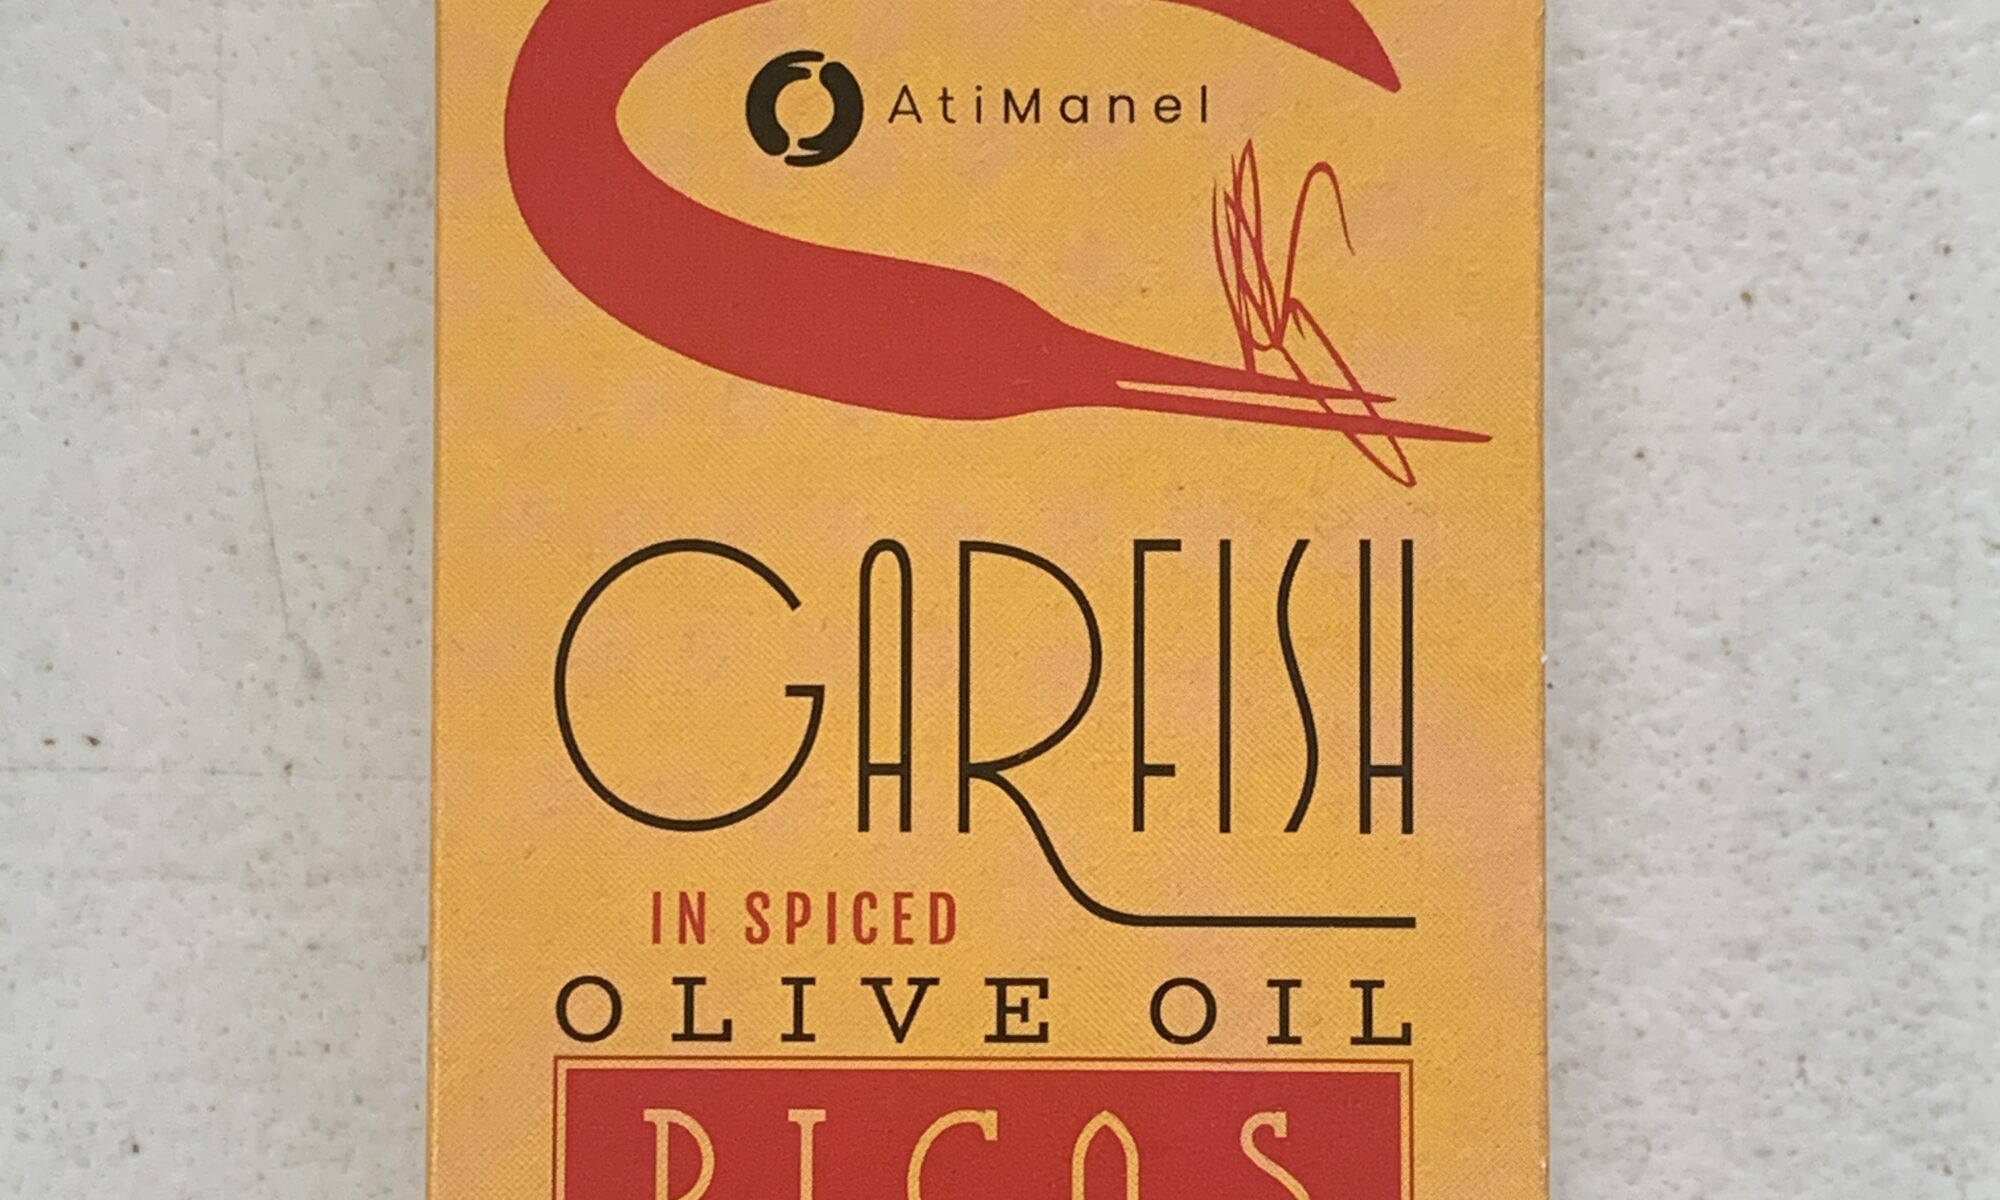 Image of the front of a package of Ati Manel Garfish in Spiced Olive Oil